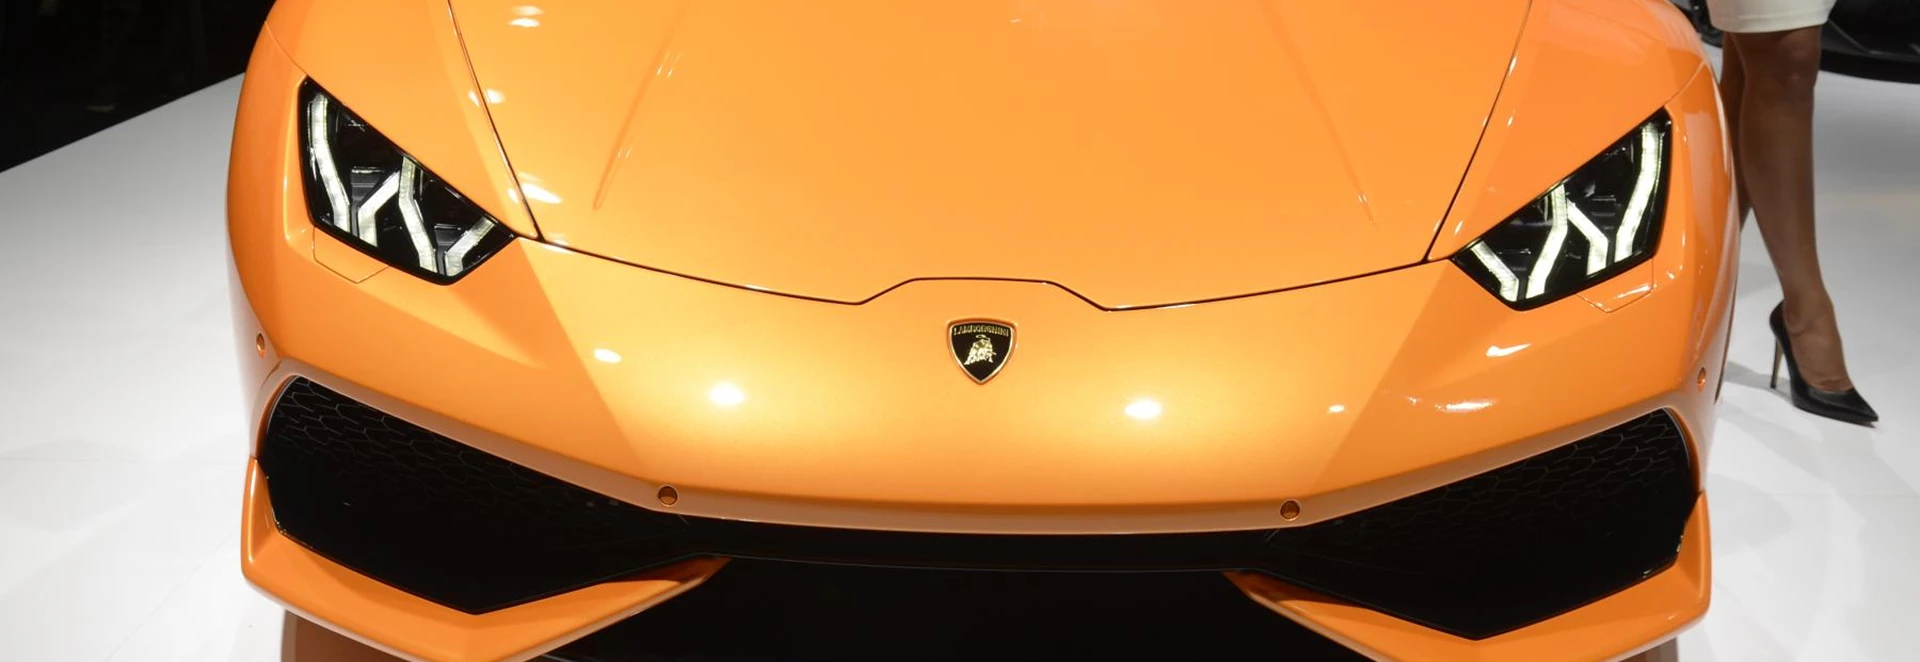 Stolen Lamborghini Huracan Found in Africa bound Shipping Container 